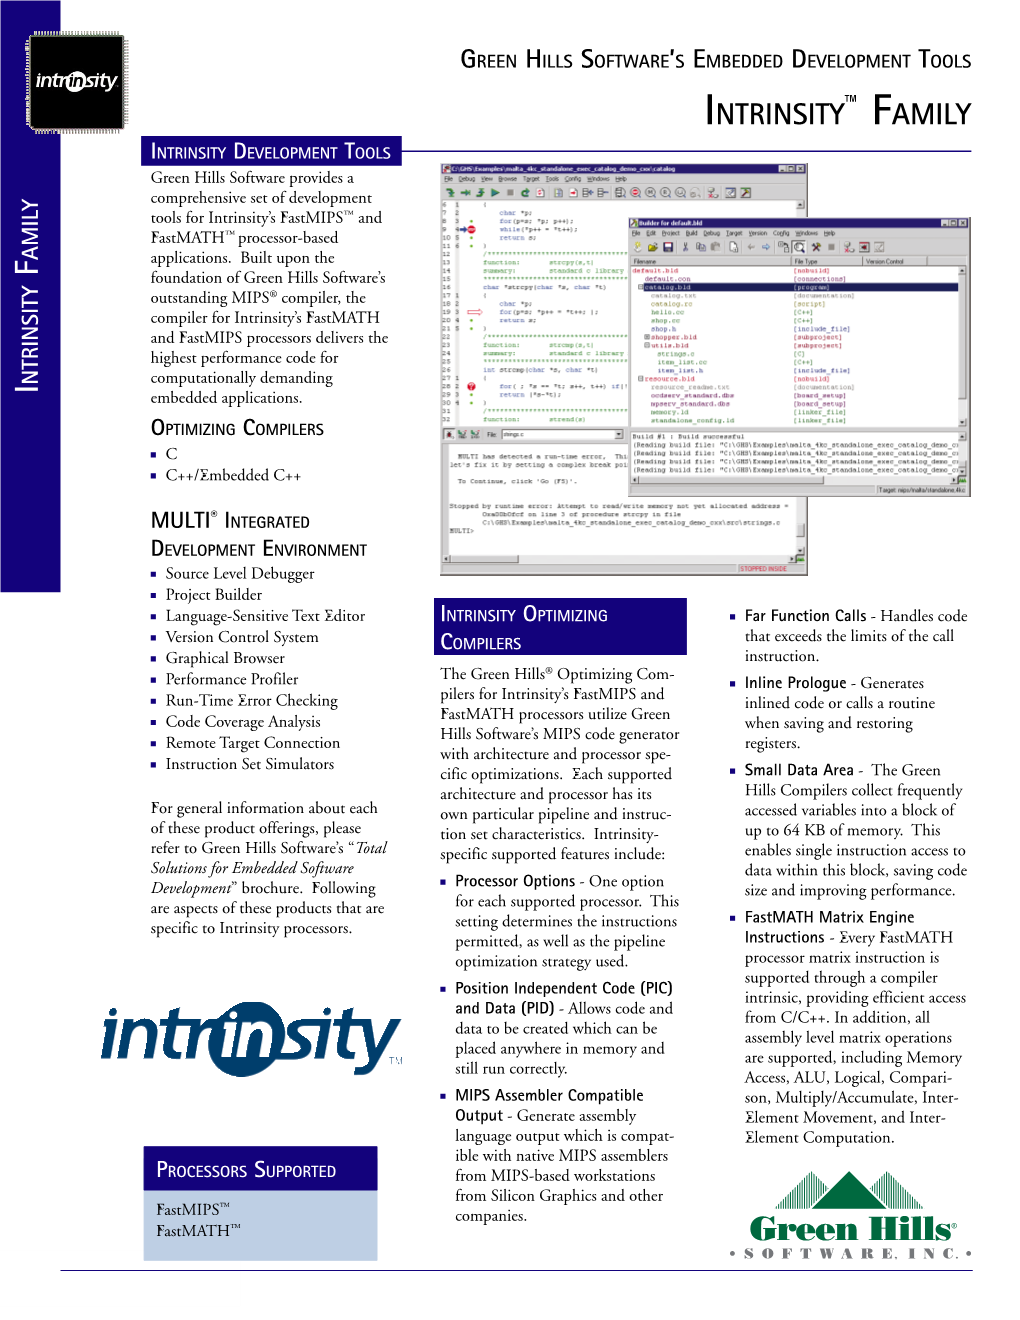 Green Hills Software's Embedded Development Tools Intrinsity Family